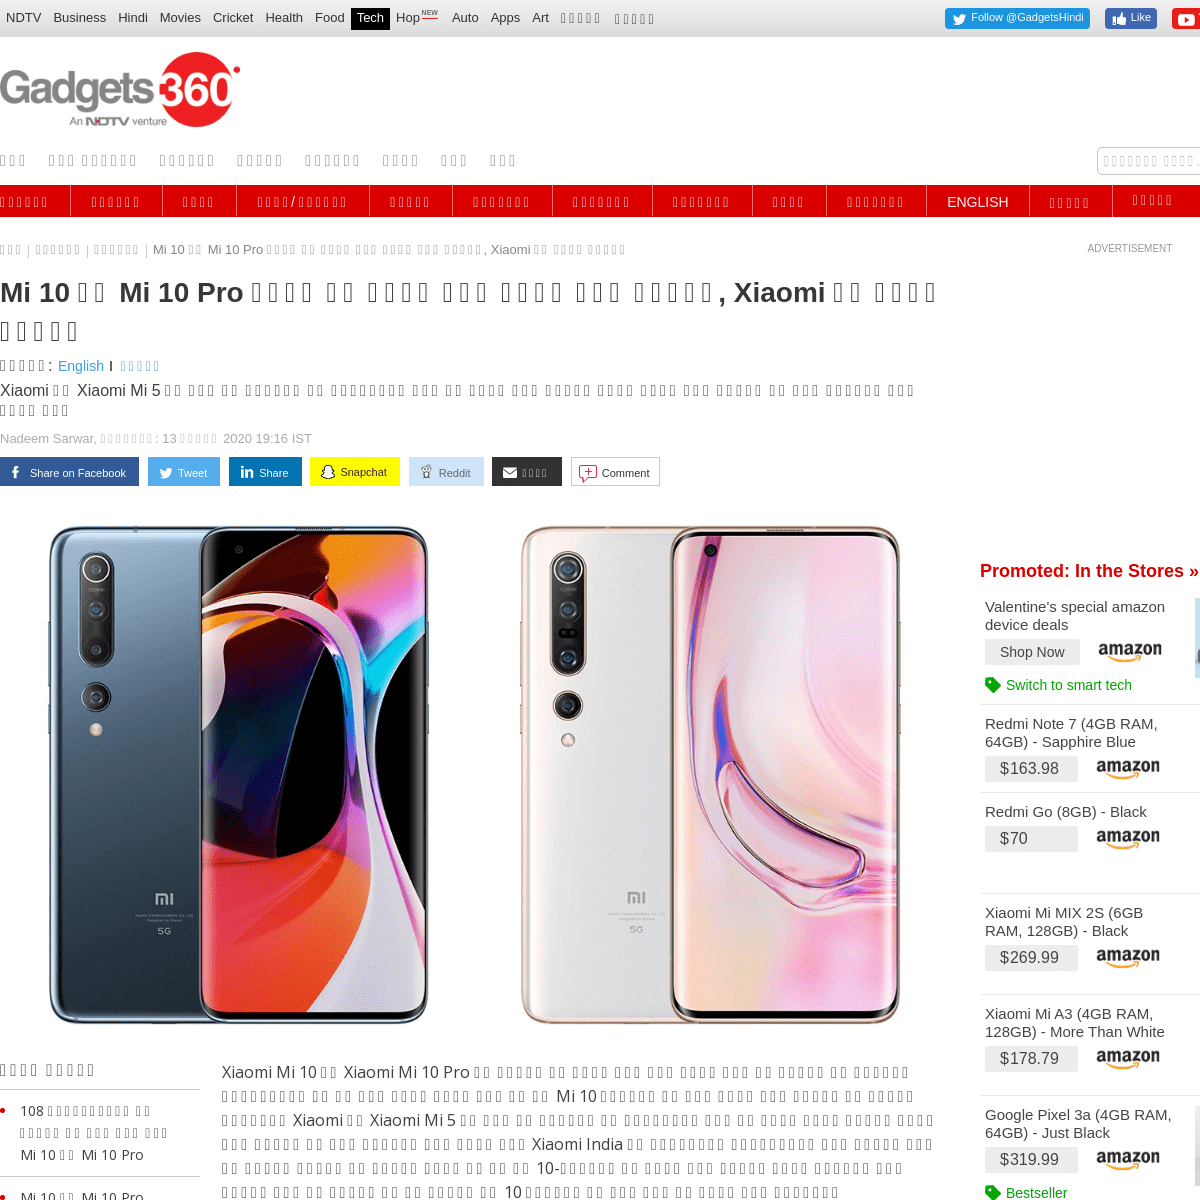 A complete backup of gadgets.ndtv.com/hindi/mobiles/mi-10-mi-10-pro-might-launch-in-india-soon-teases-xiaomi-india-boss-manu-kum